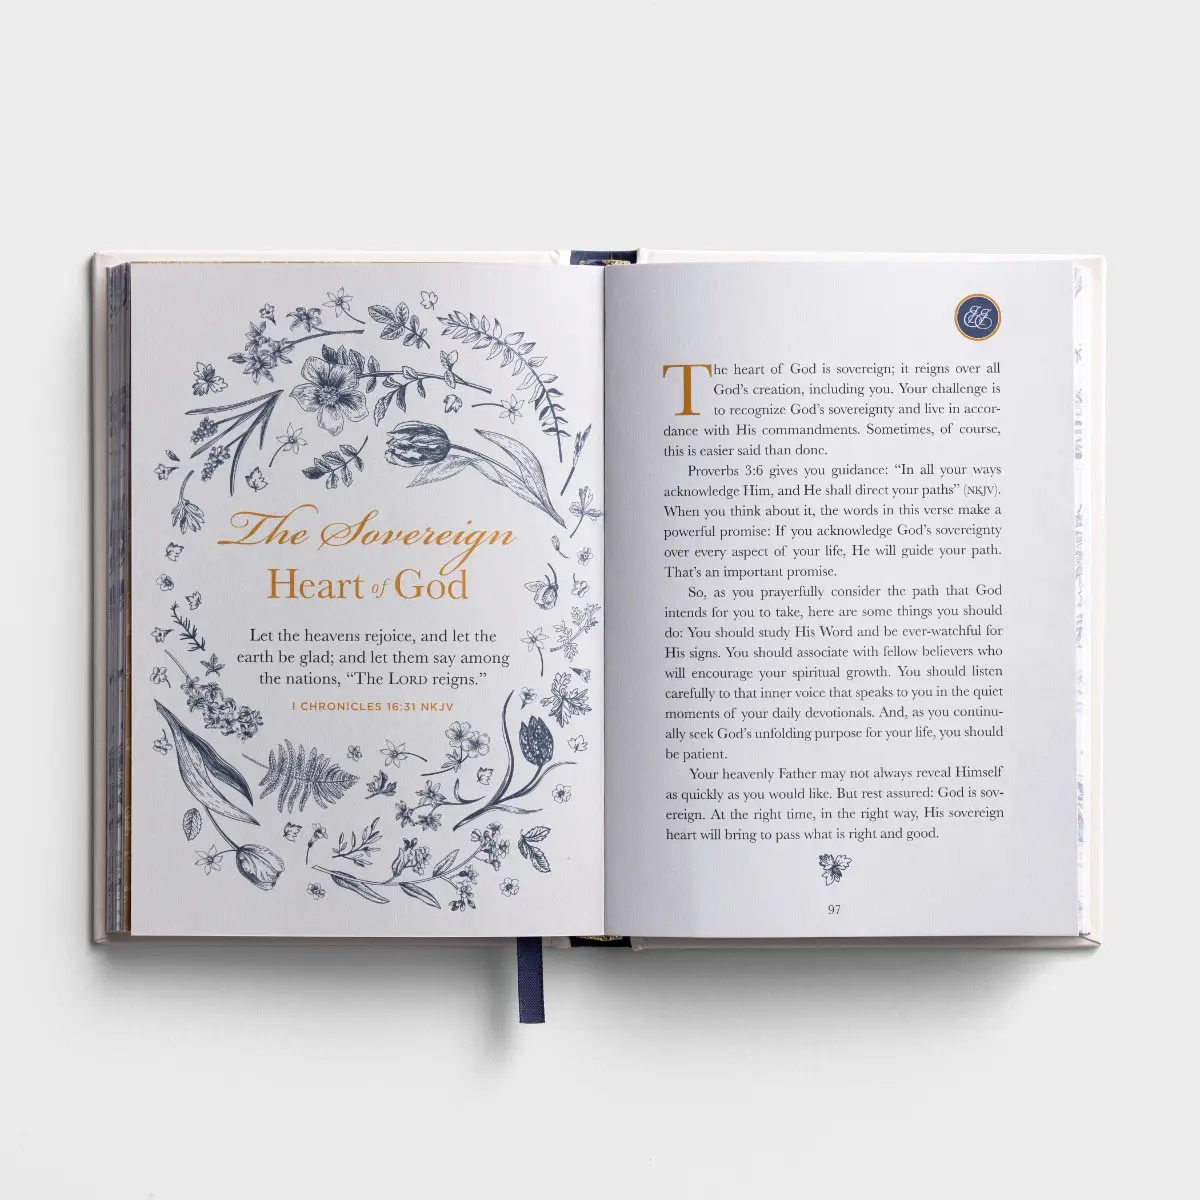 Heart of God: 31 Days to Discover God's Love for You (hardcover)